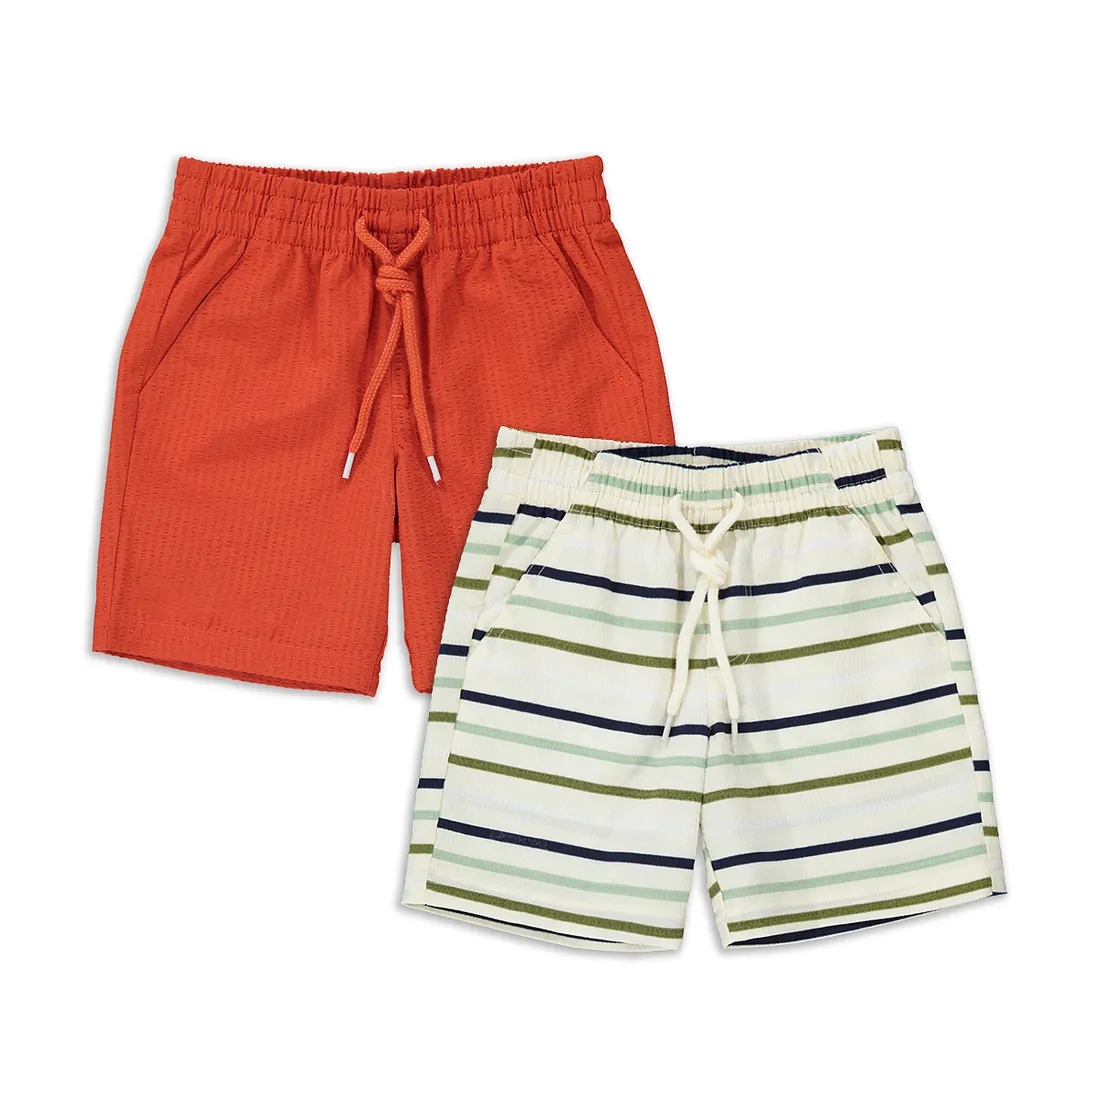 2 Pack stripe shorts white & rust - BOYS 2-8 YEARS Bottoms & Jeans ...